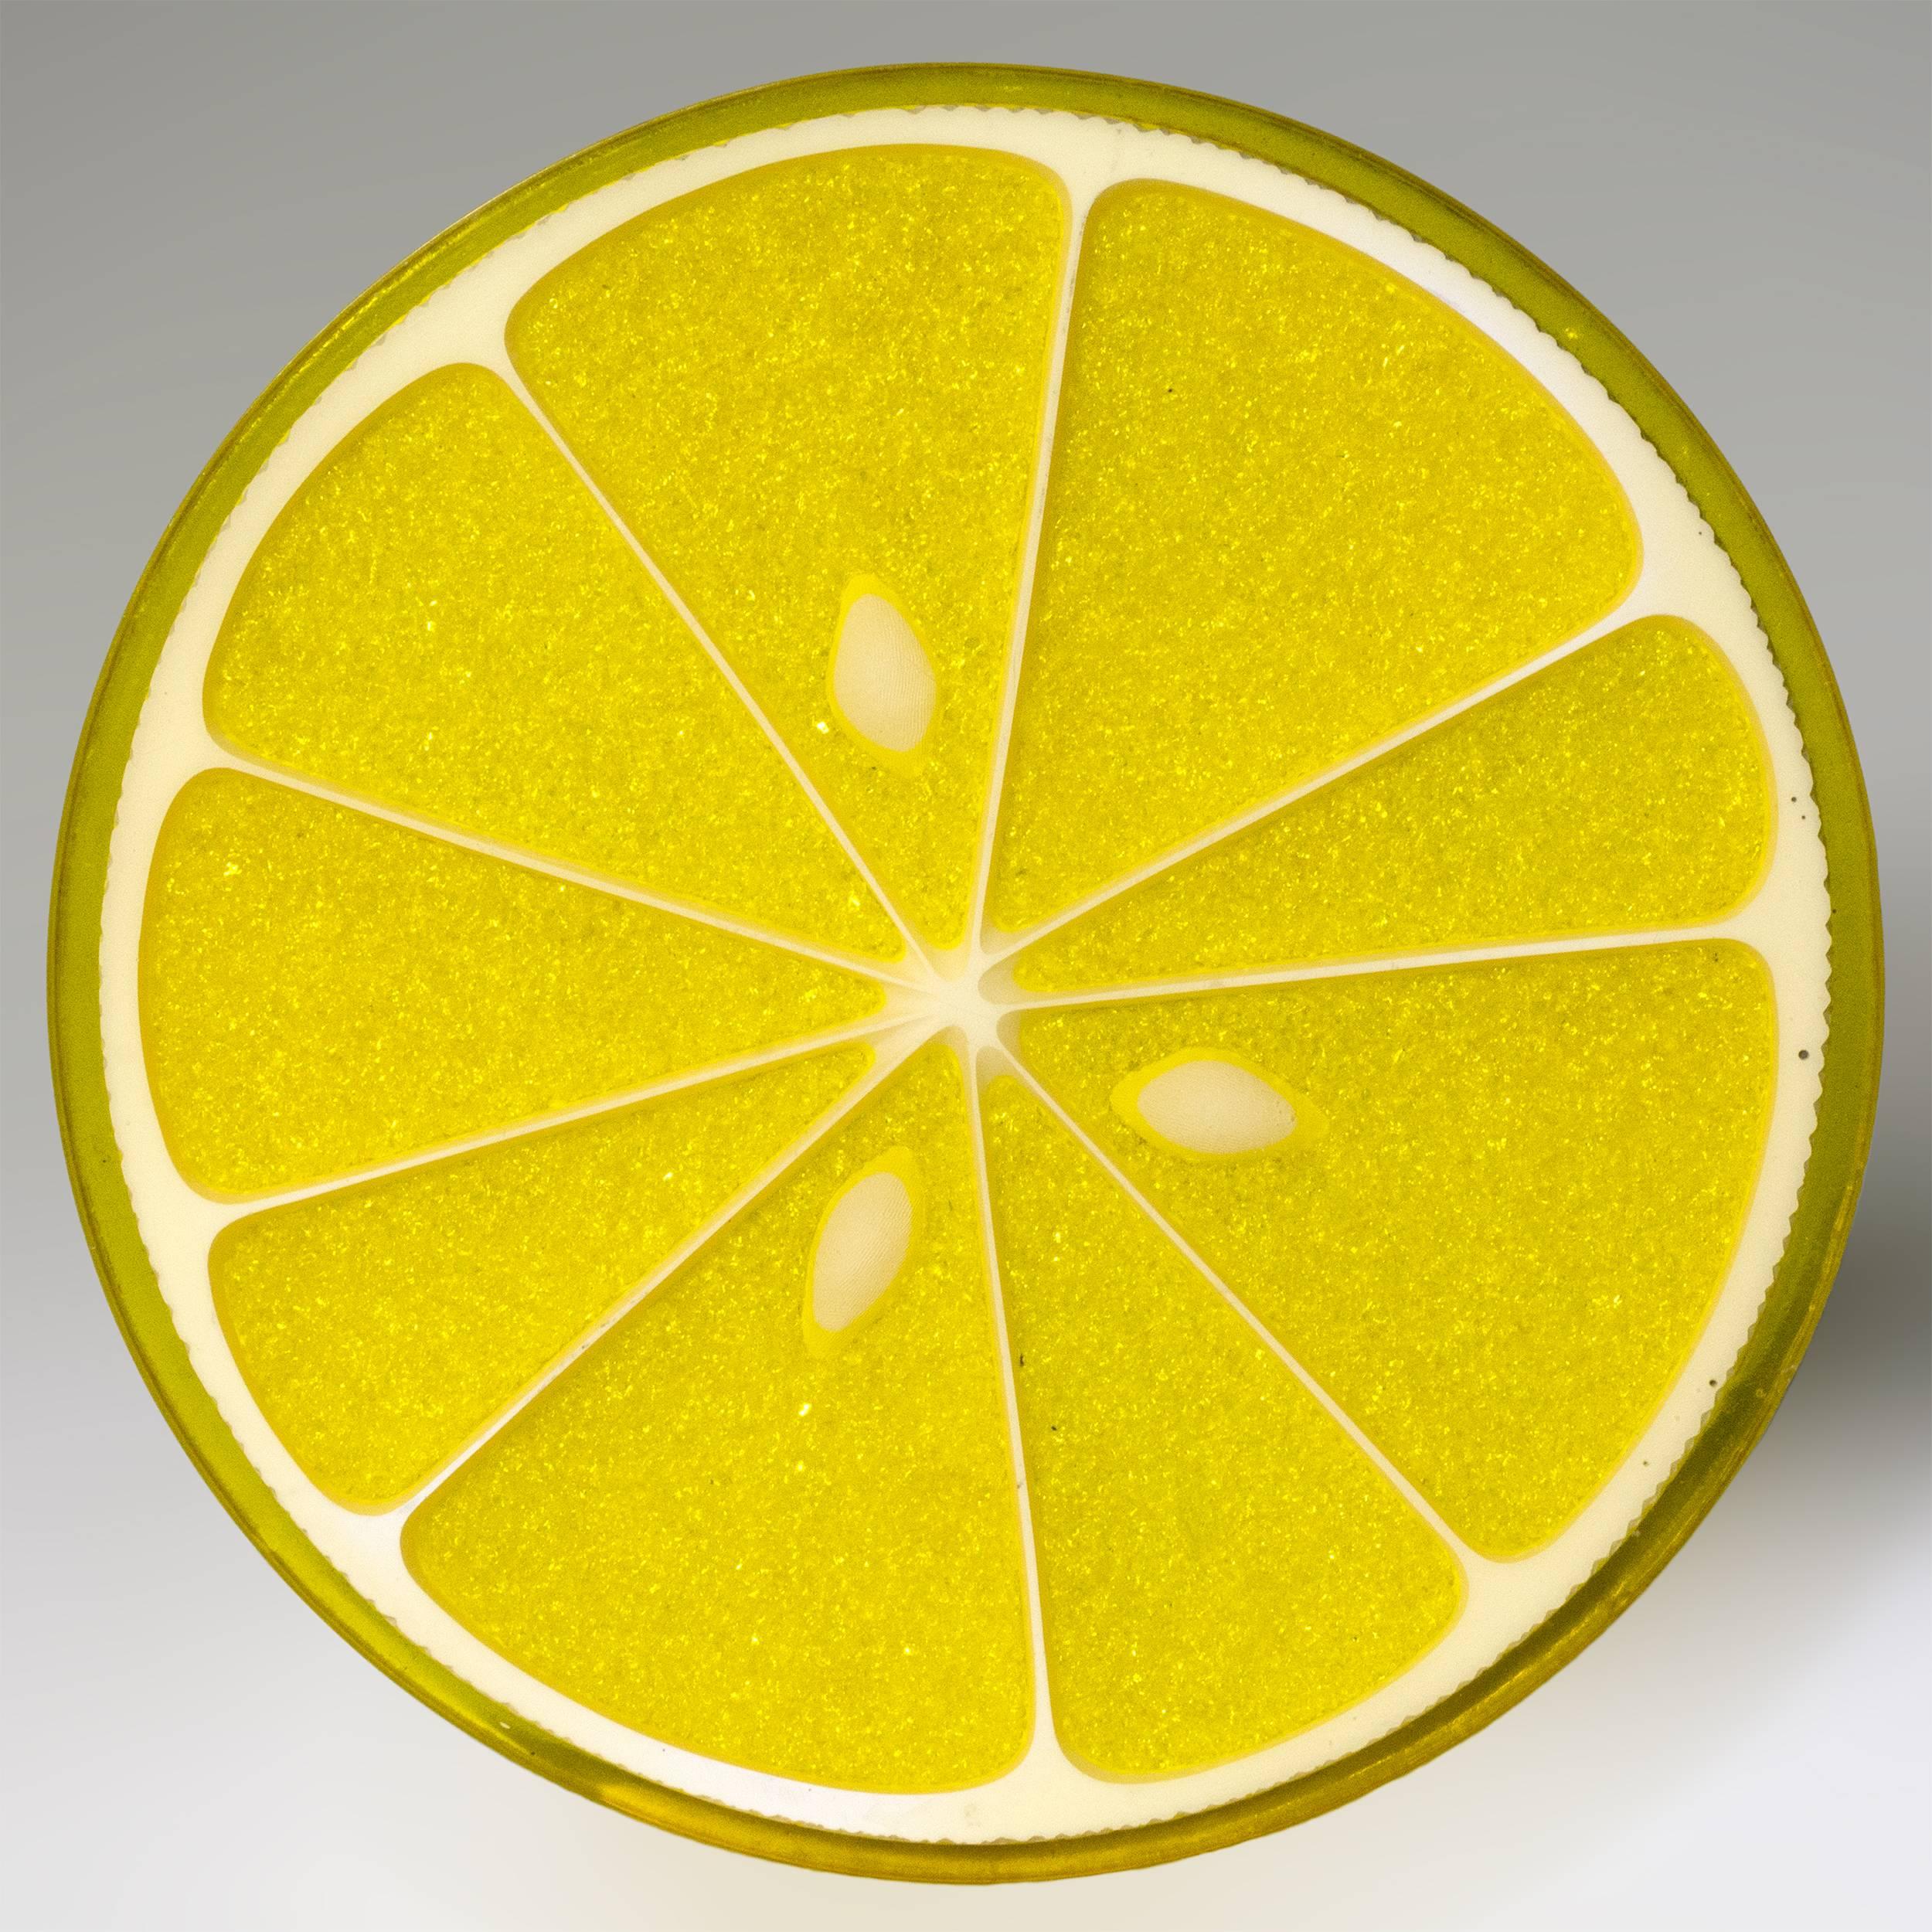 A citrus slice table by Carl Chaffee, circa 1970.
A realistic lemon slice in resin with crushed glass
pulp and white ceramic seeds and pith. 
The trompe l’oeil top raised on a cluster of 12
rubber tipped chromed steel rods.
   